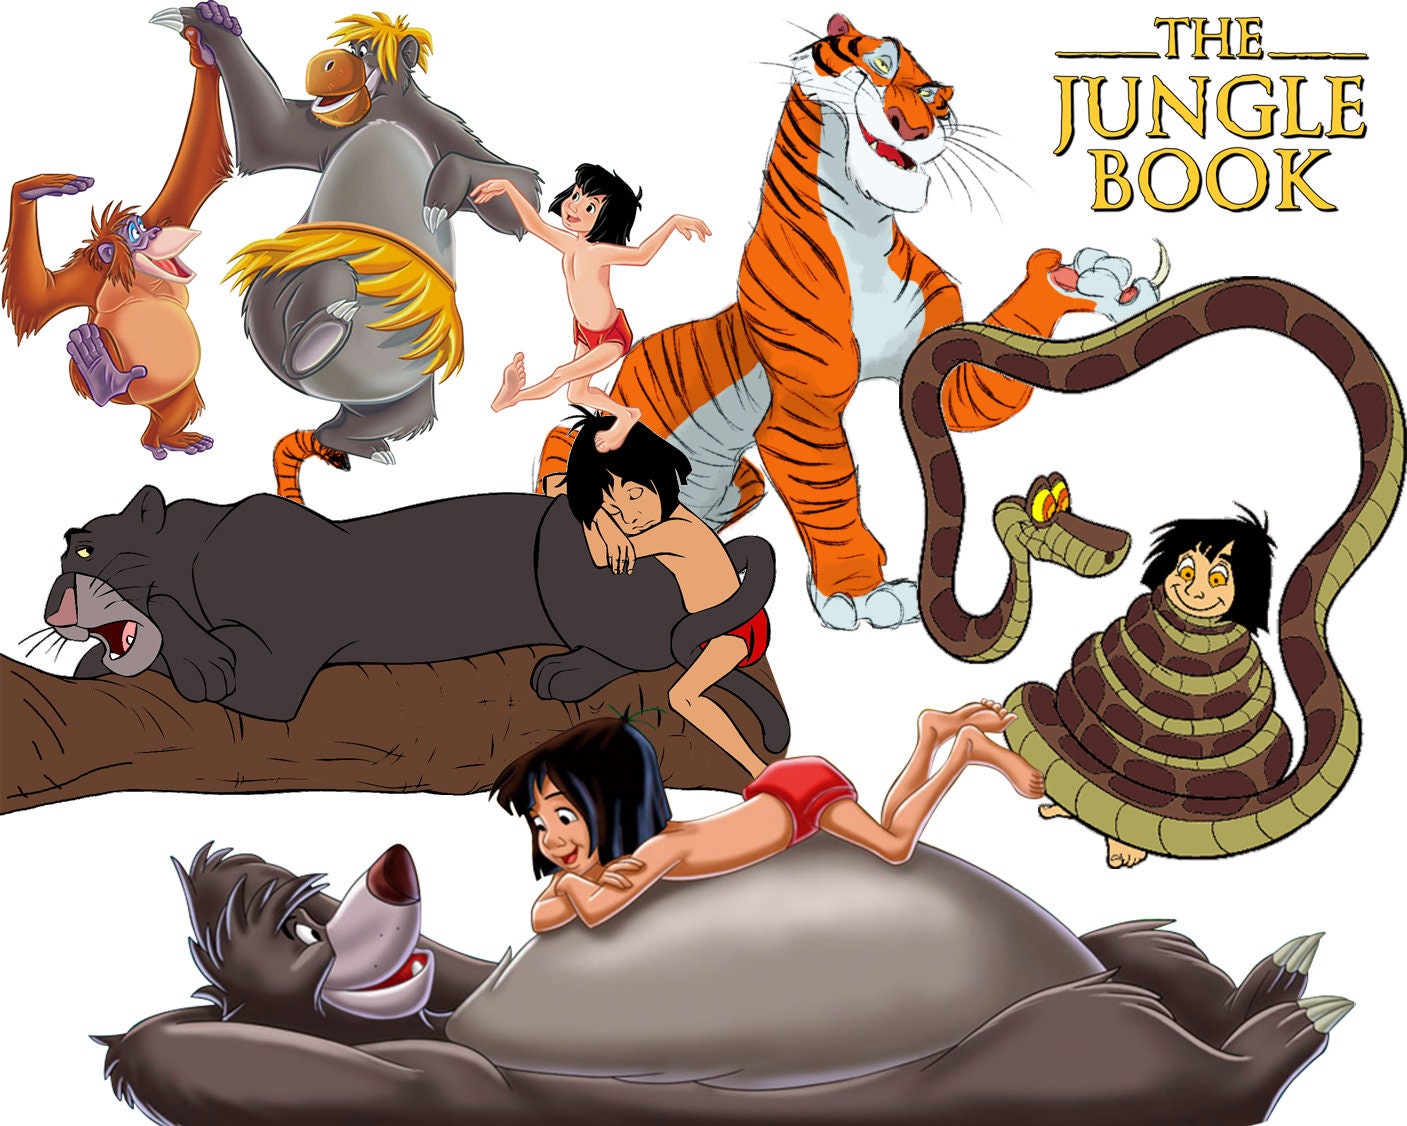 BEST collection of 150 Disney's Jungle Book Clipart - 150 high quality